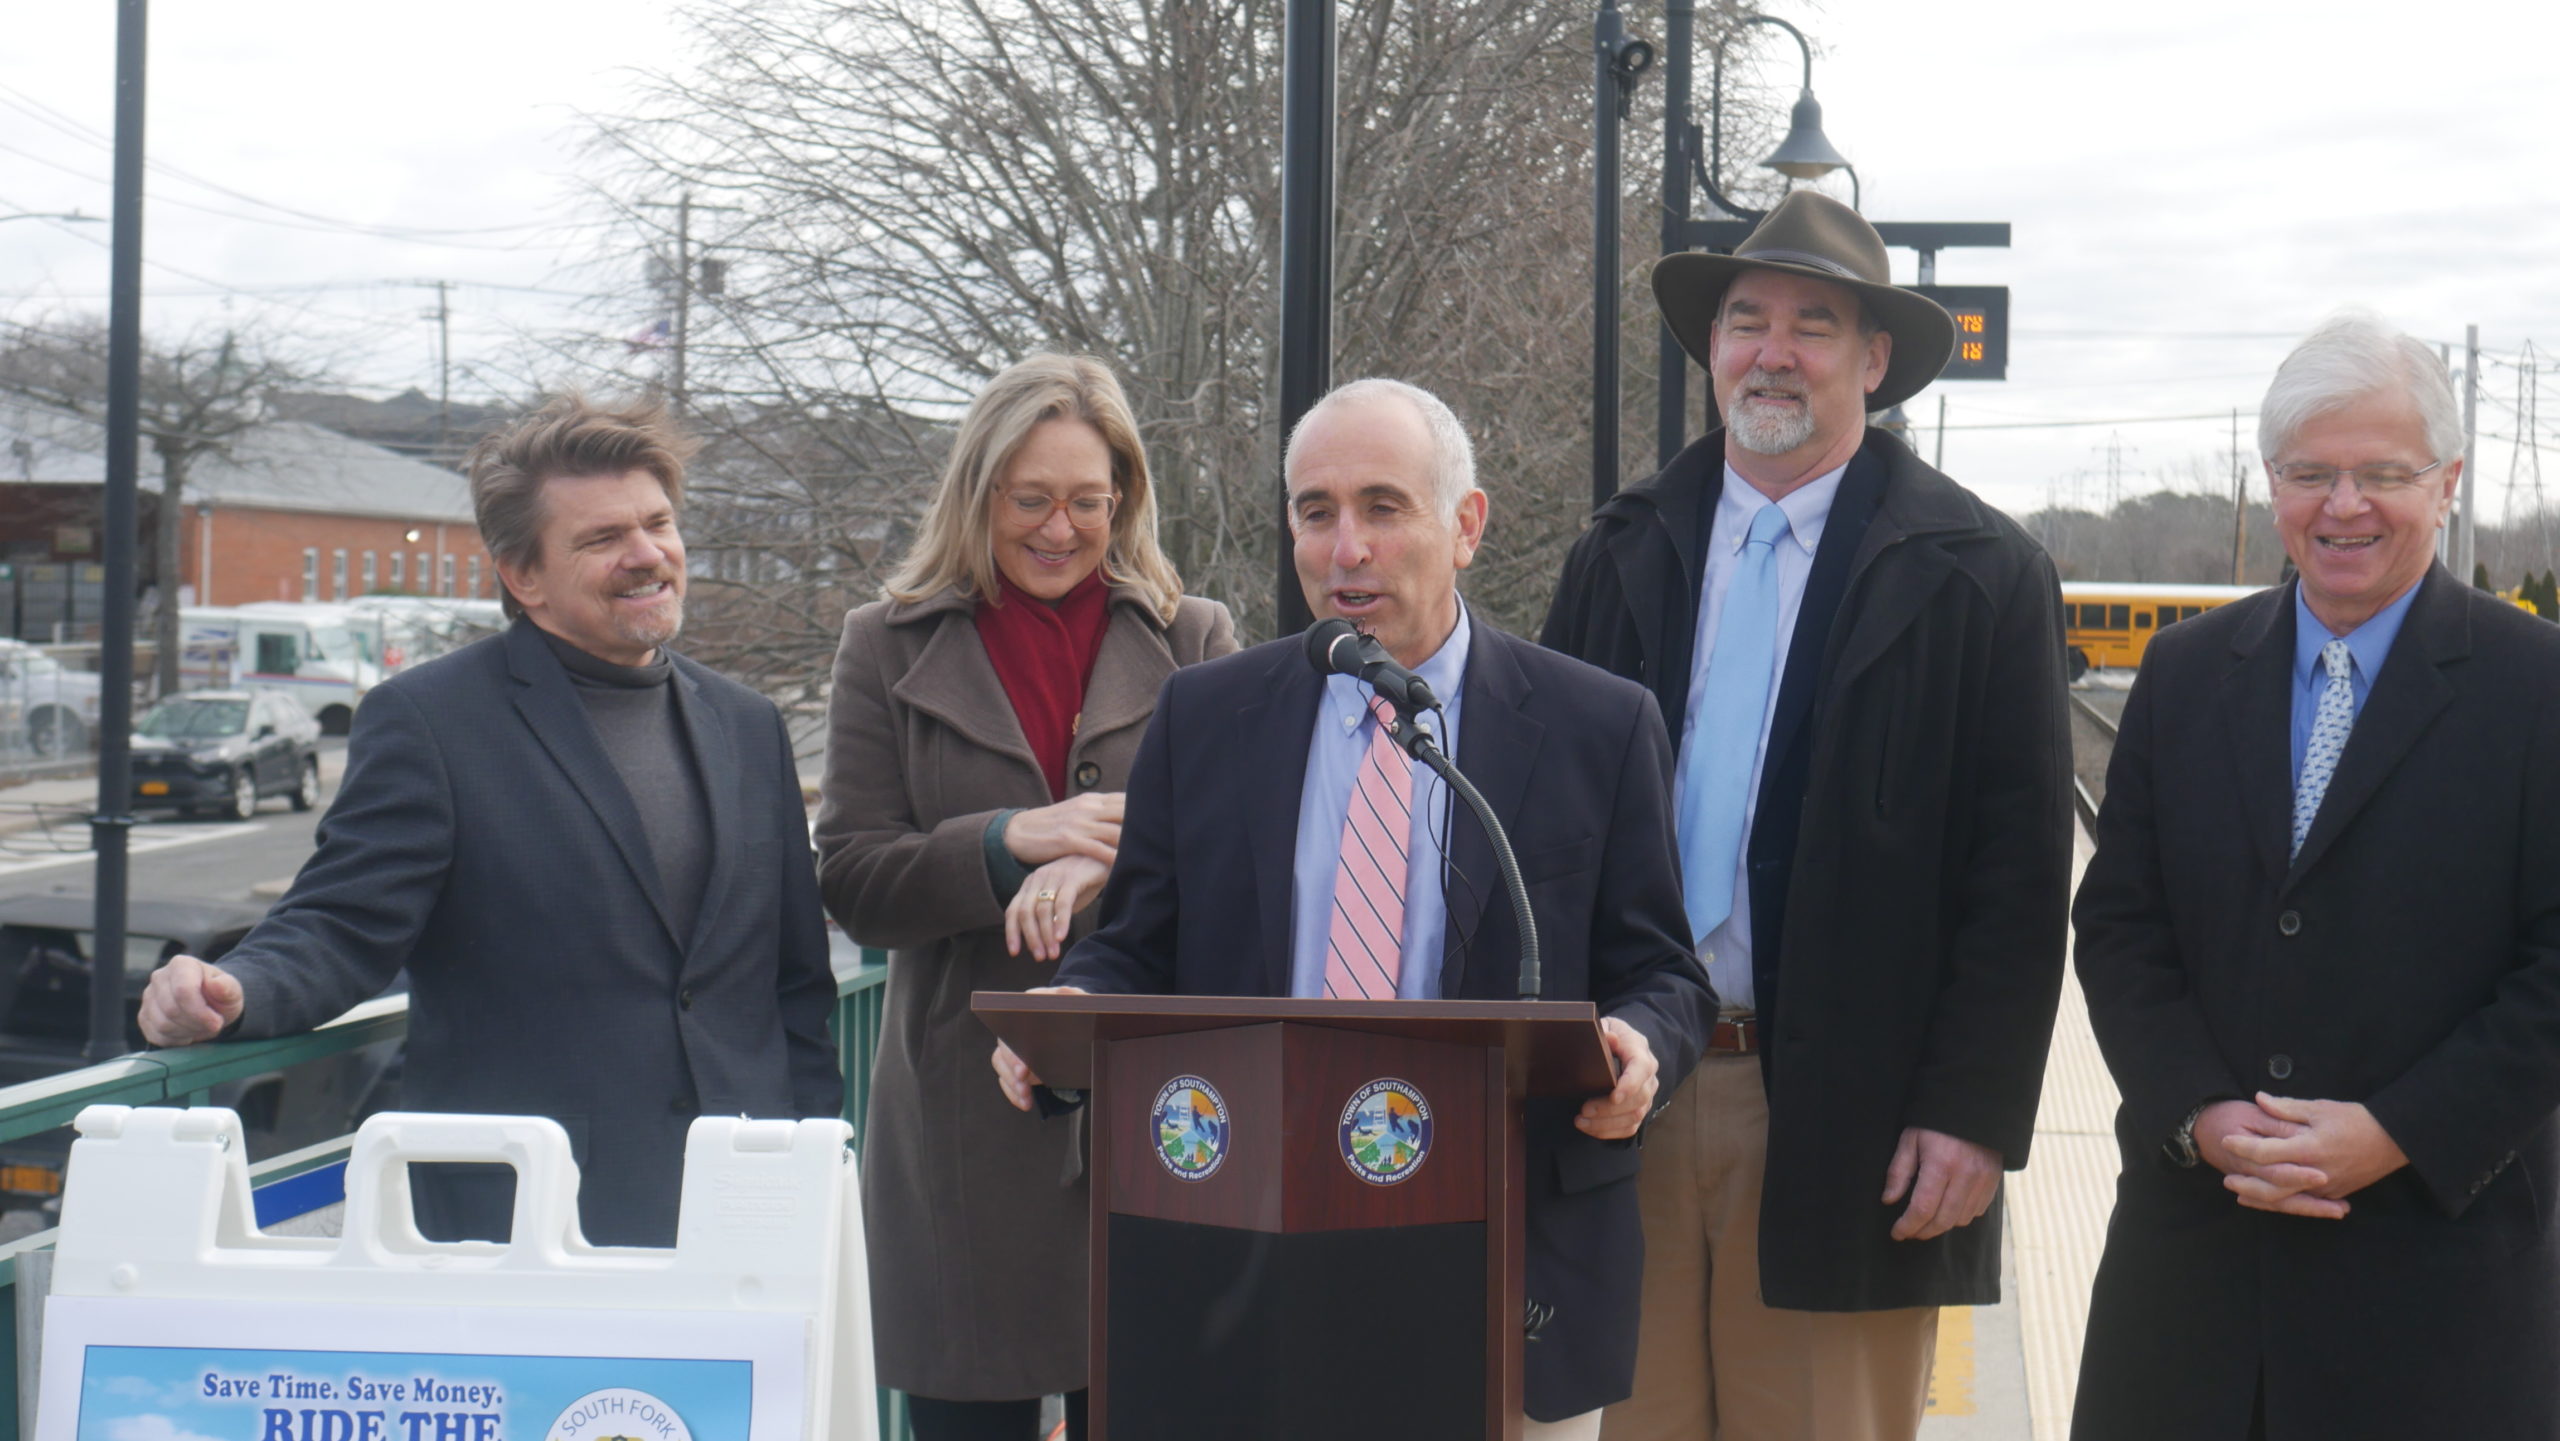 State Assemblyman Fred W. Thiele Jr. discusses the success of the South Fork Commuter Connection as Southampton Town Councilman Tommy John Schiavoni, Suffolk County Legislator Bridget Fleming, East Hampton Town Supervisor Peter Van Scoyoc, and Southampton Town Supervisor Jay Schneiderman look on. CONNIE CONWAY